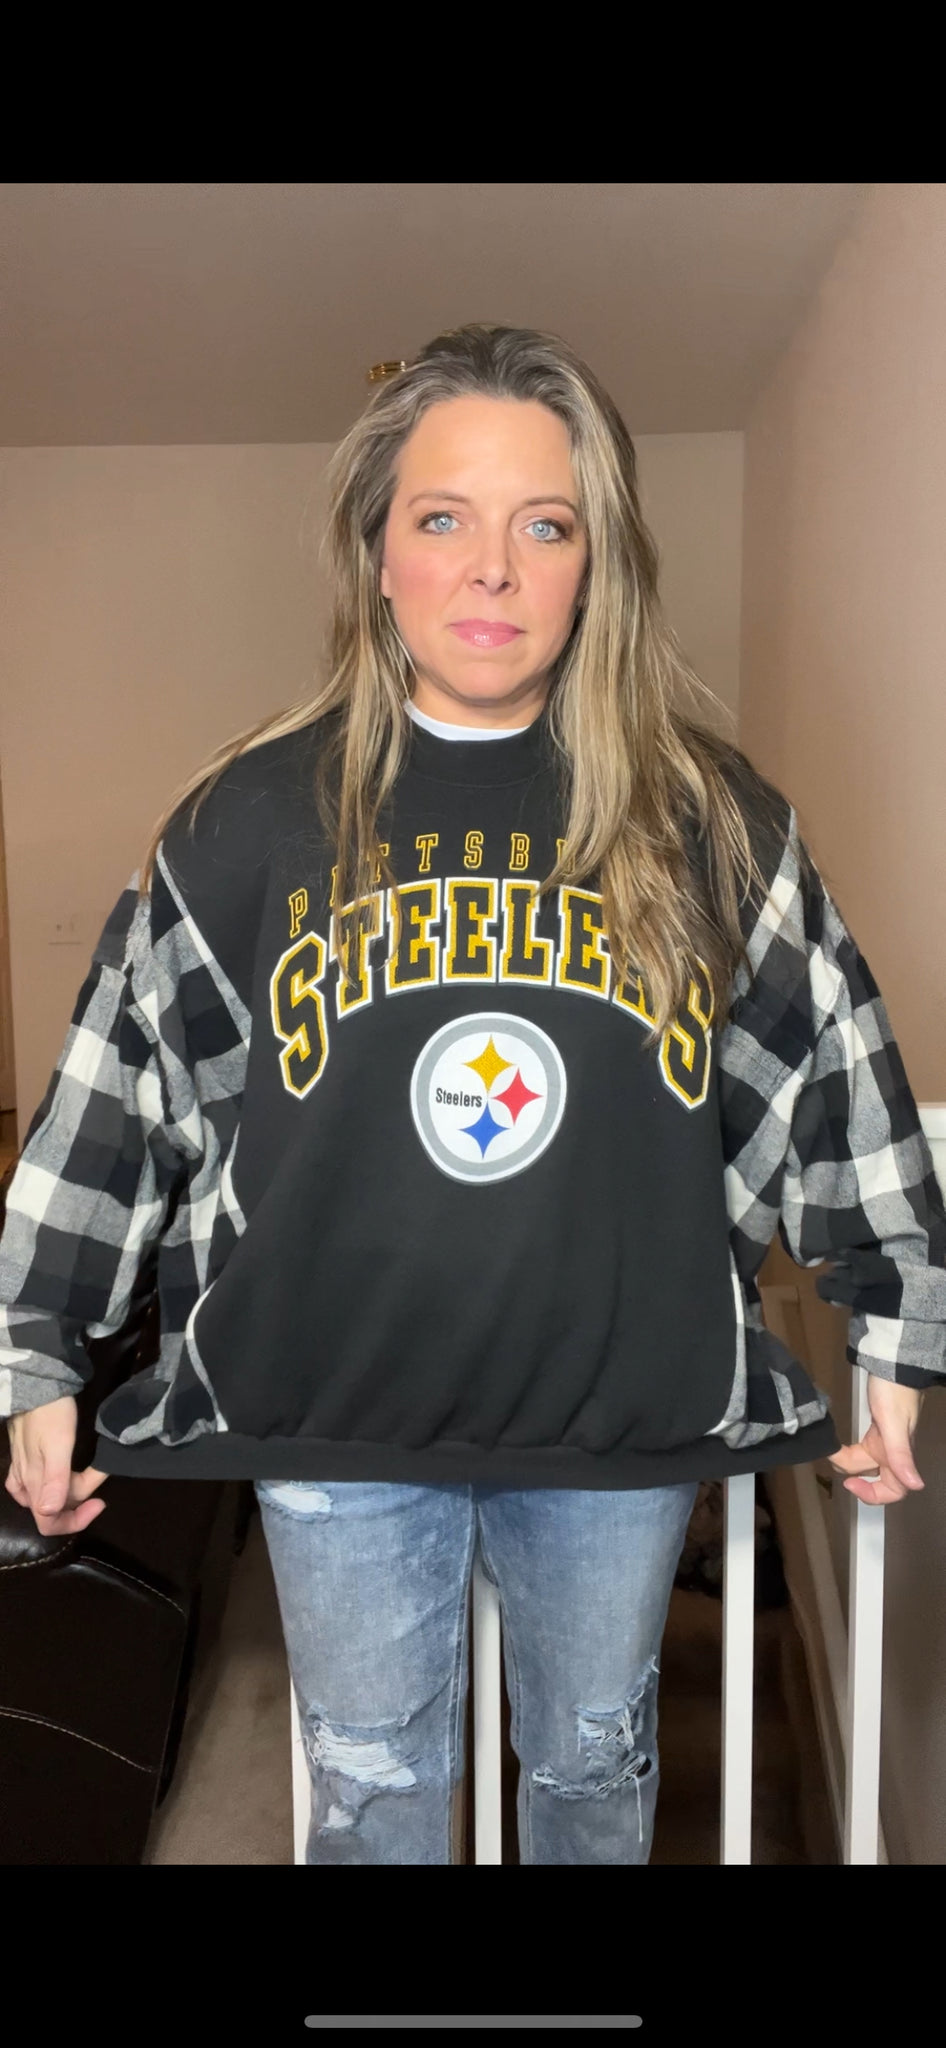 Steelers – women’s L/XL – thick sweatshirt with flannel sleeves – slightly tighter bottom band